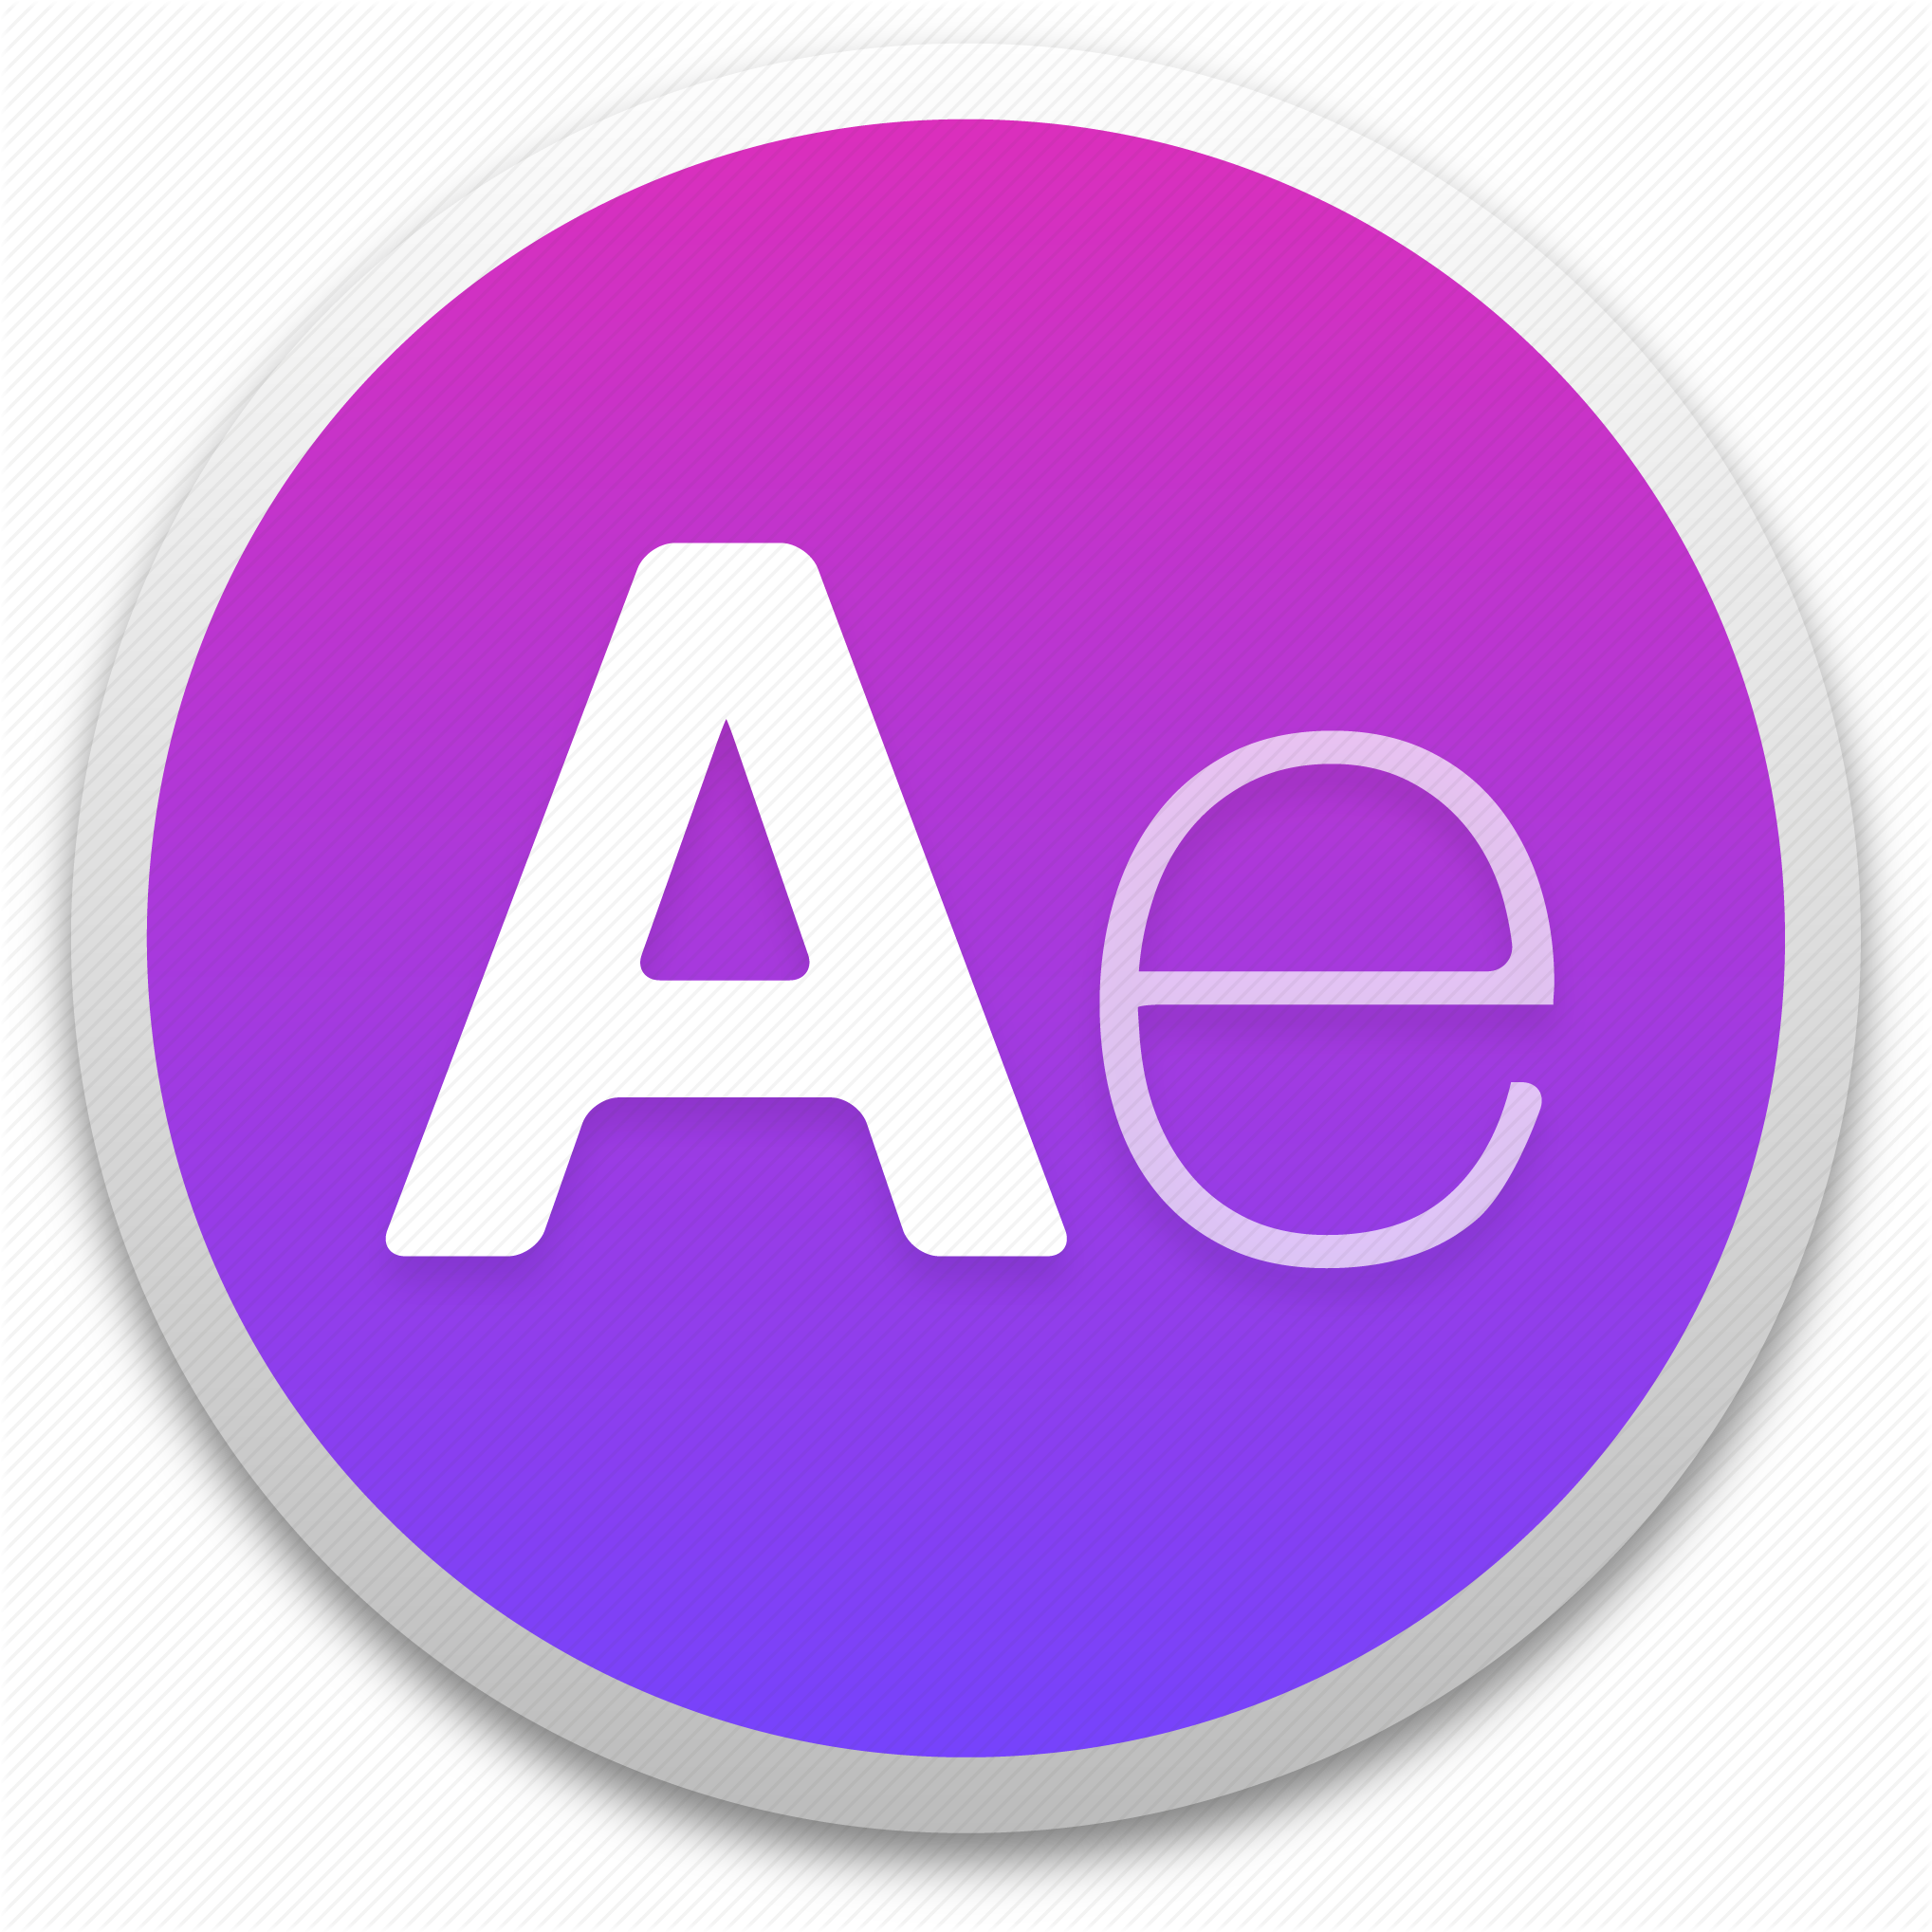 File:Adobe After Effects CC icon.svg - Wikipedia